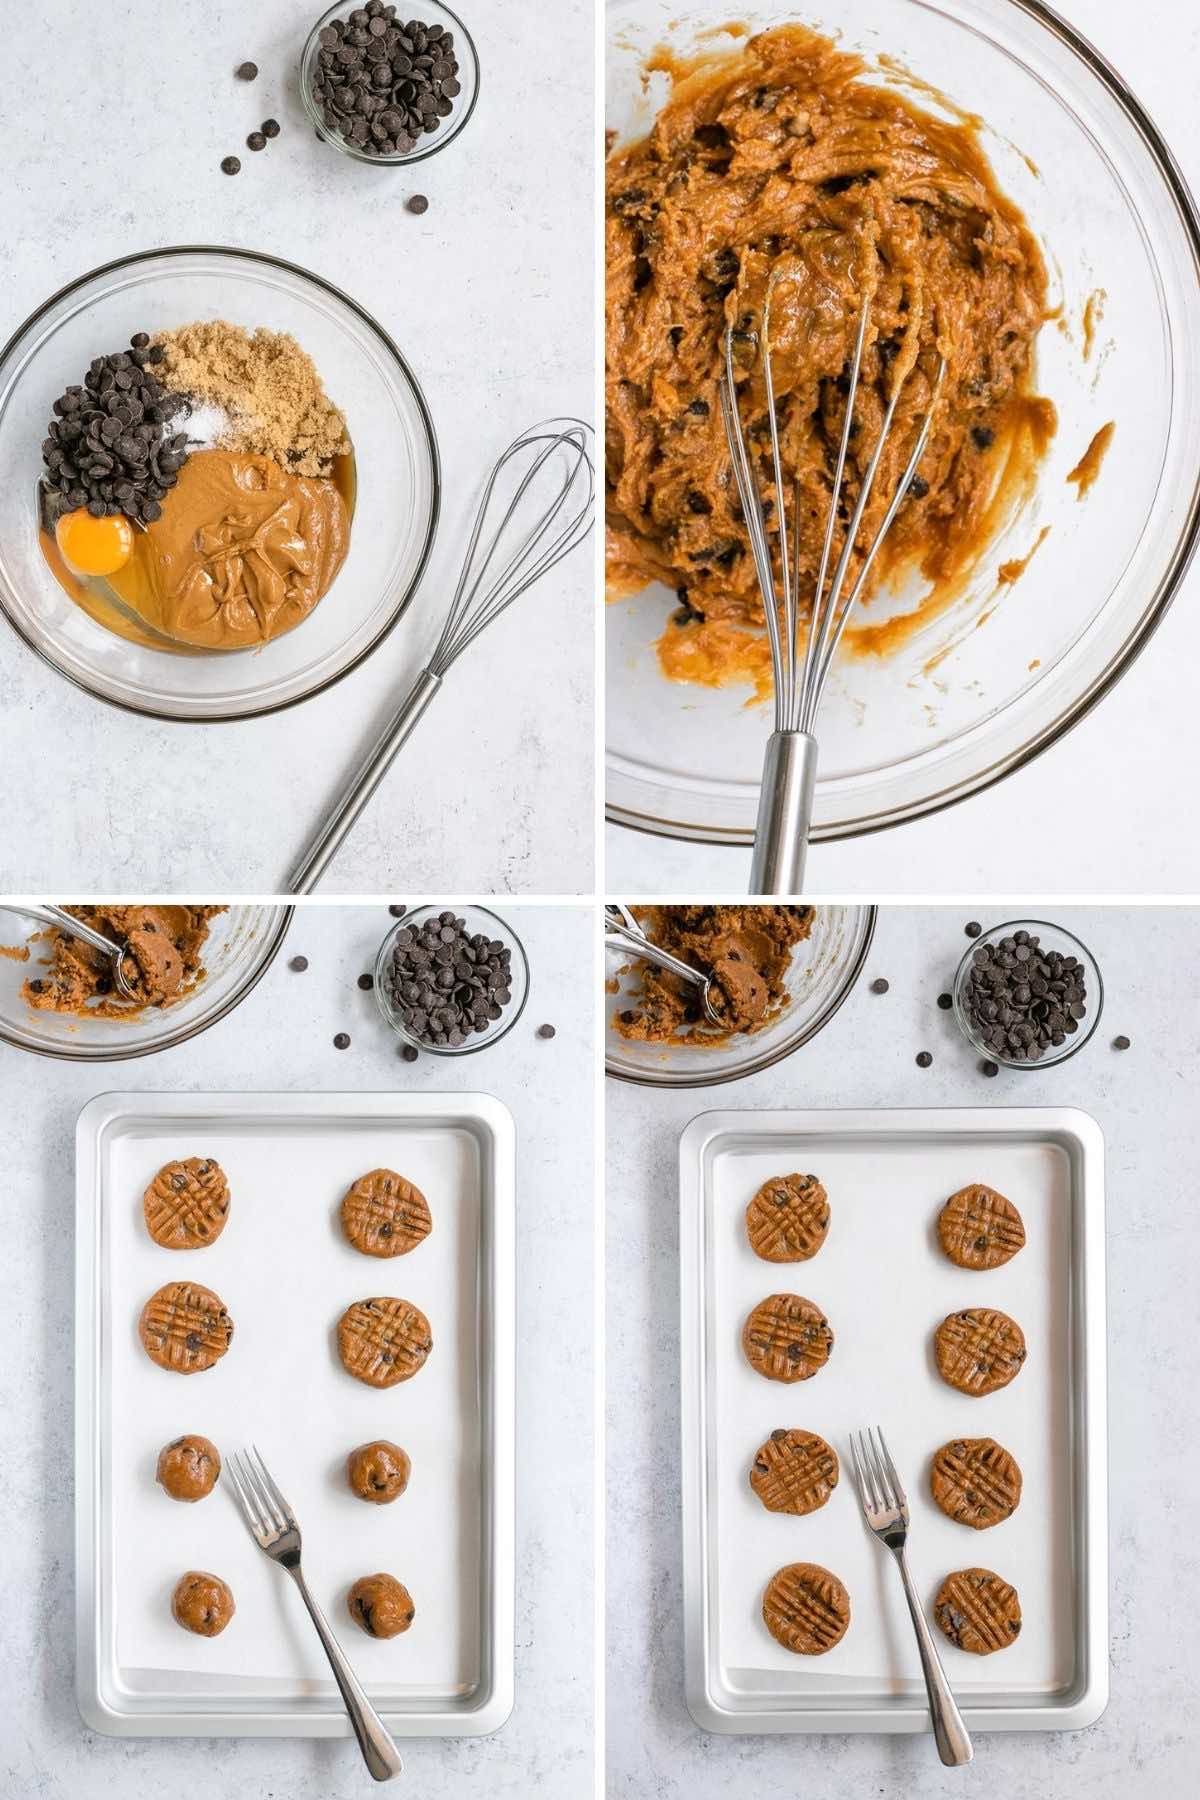 Flourless Peanut Butter Chocolate Chip Cookies collage